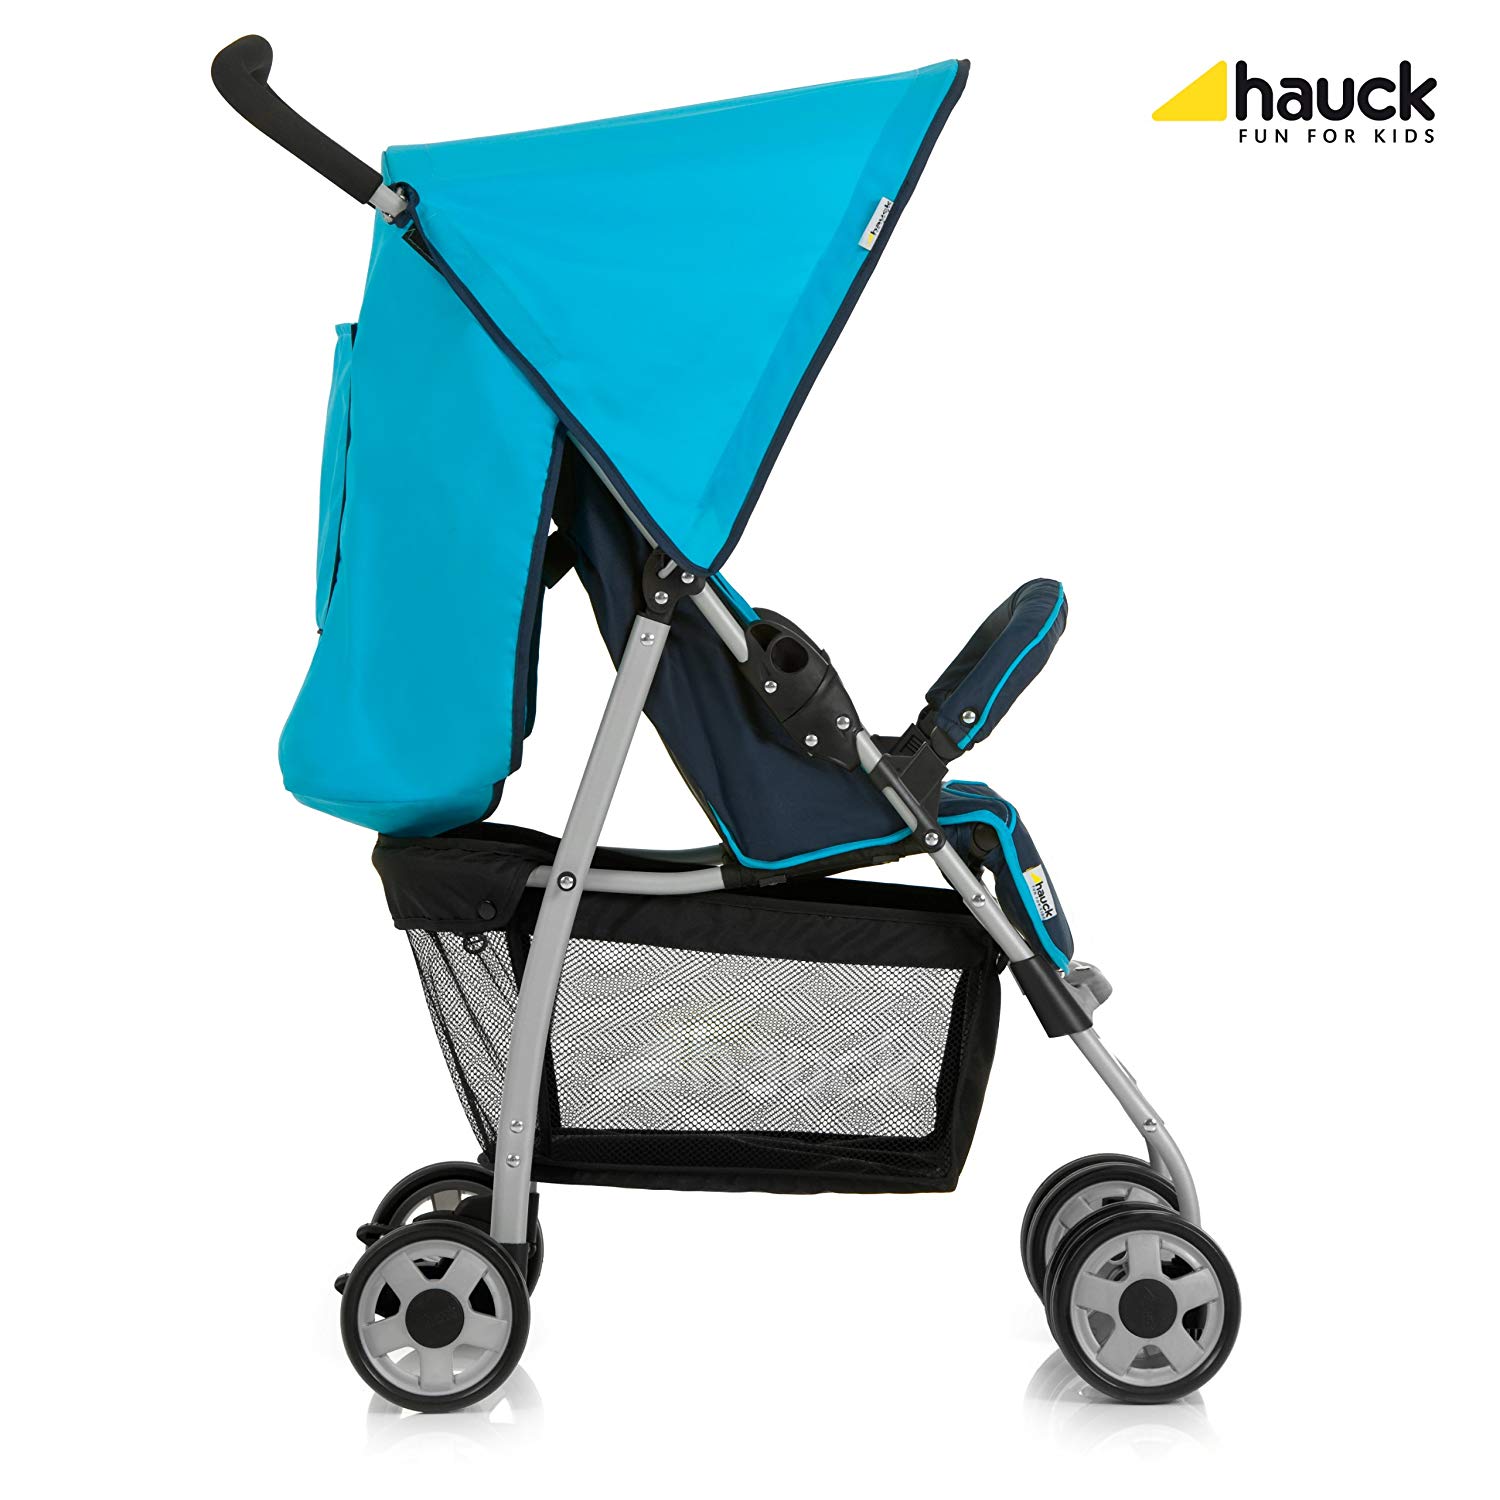 Hauck Lightweight Stroller up to 18 kg with reclining function from birth, small foldaway, sun canopy, large basket